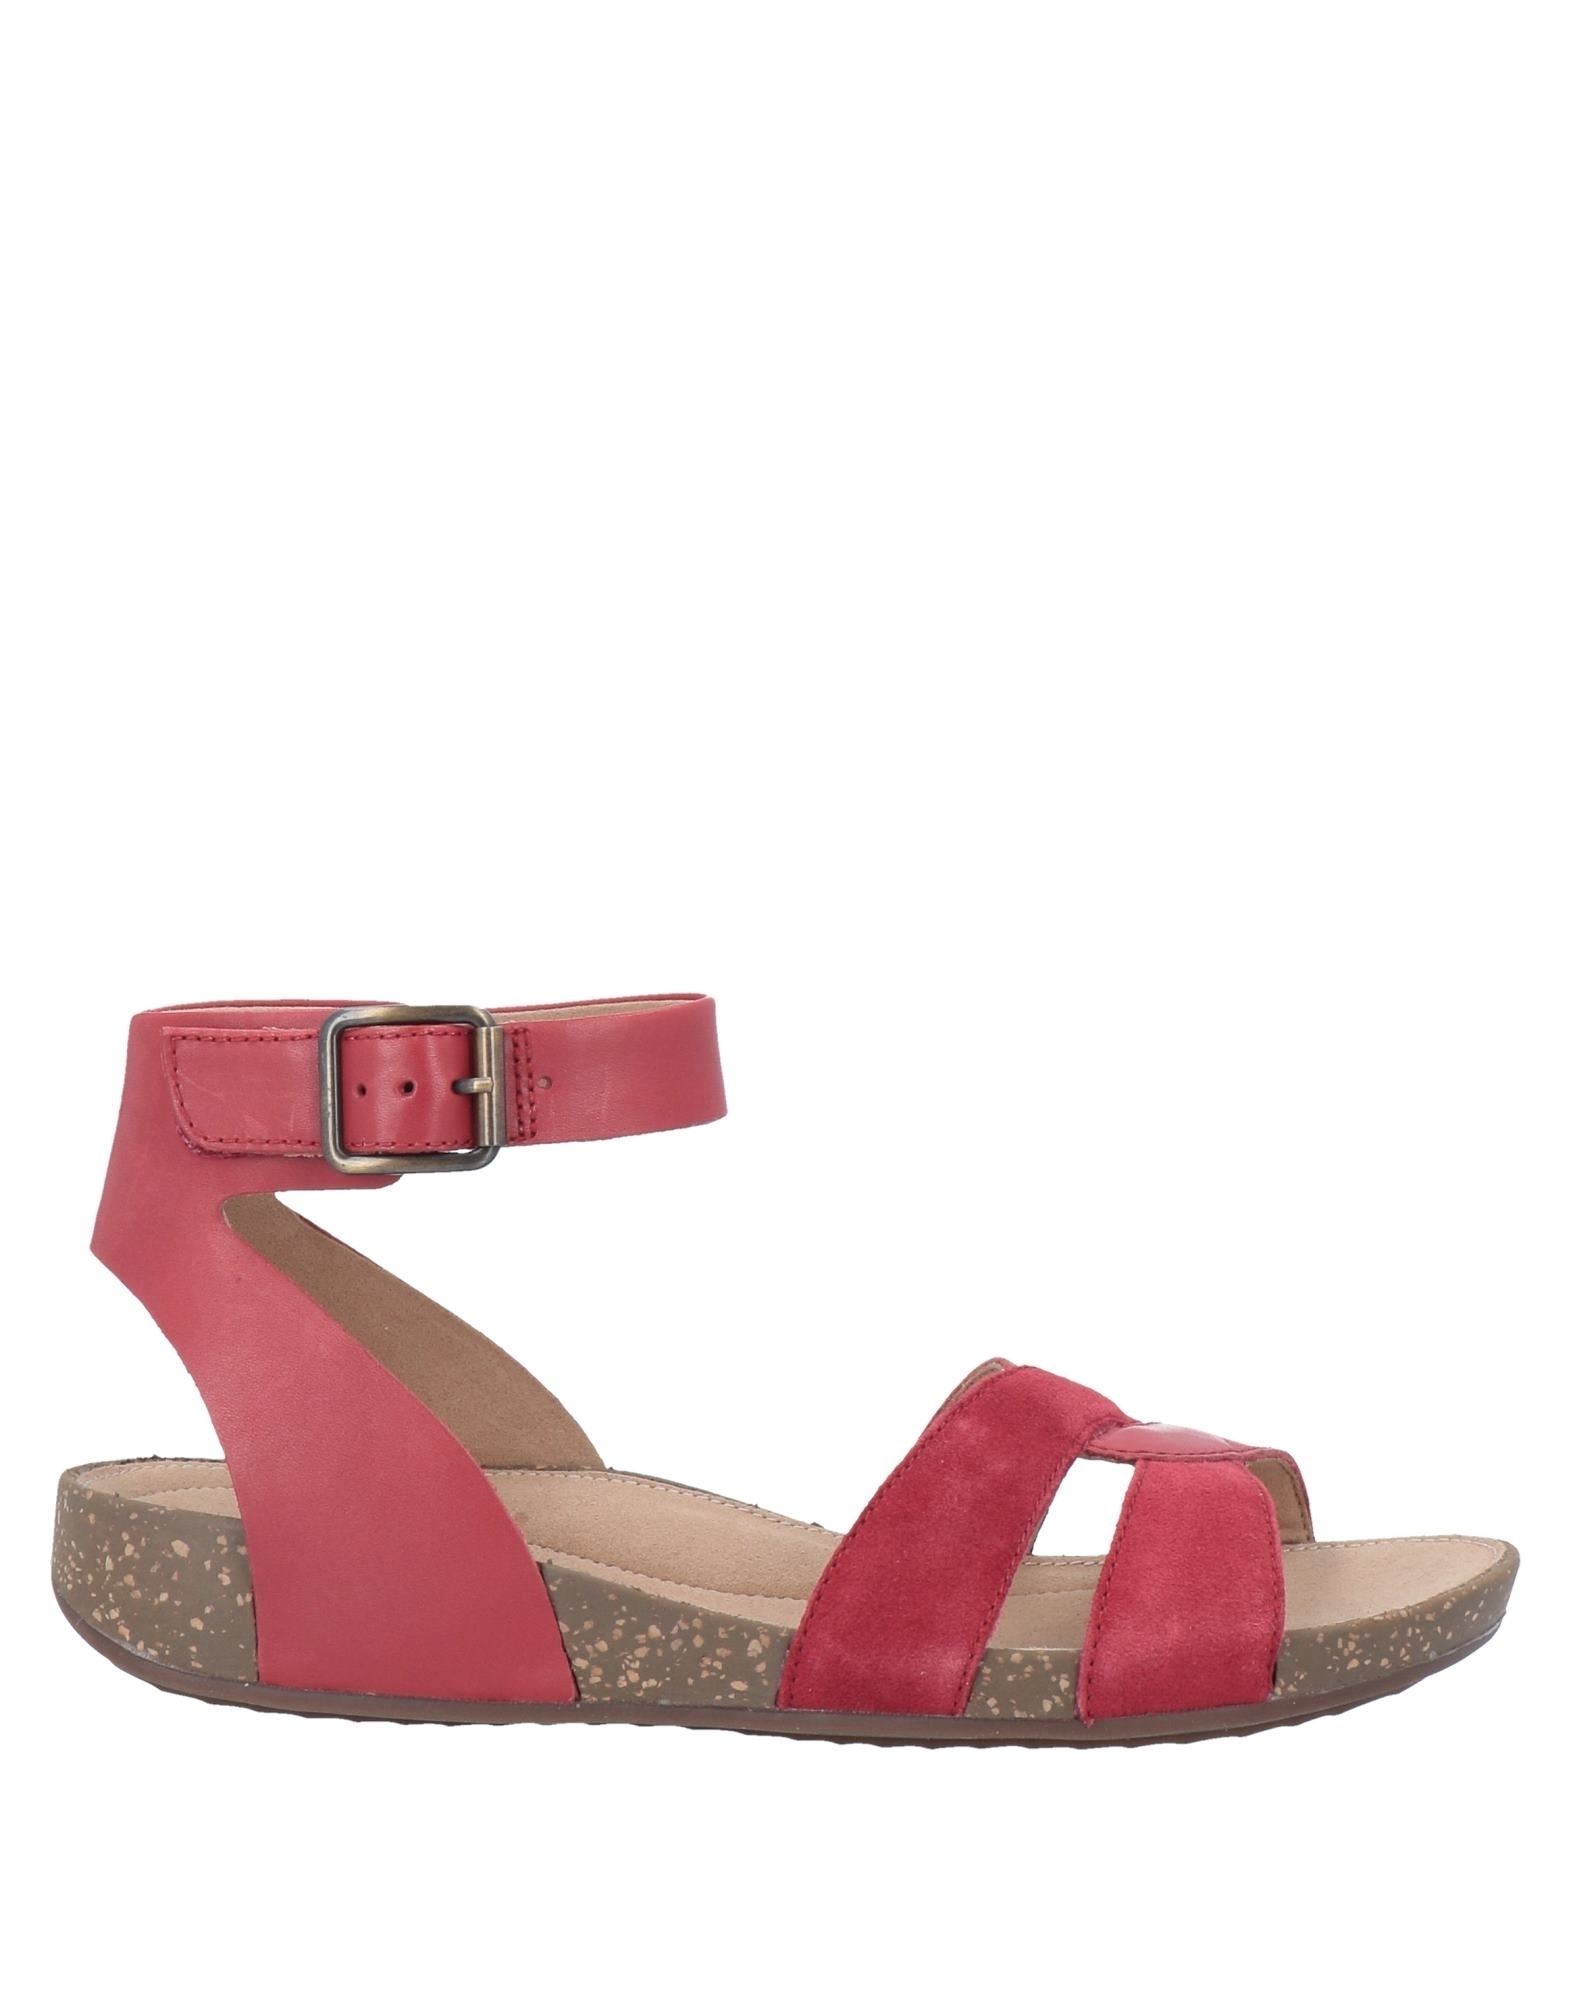 UNSTRUCTURED by CLARKS Sandals